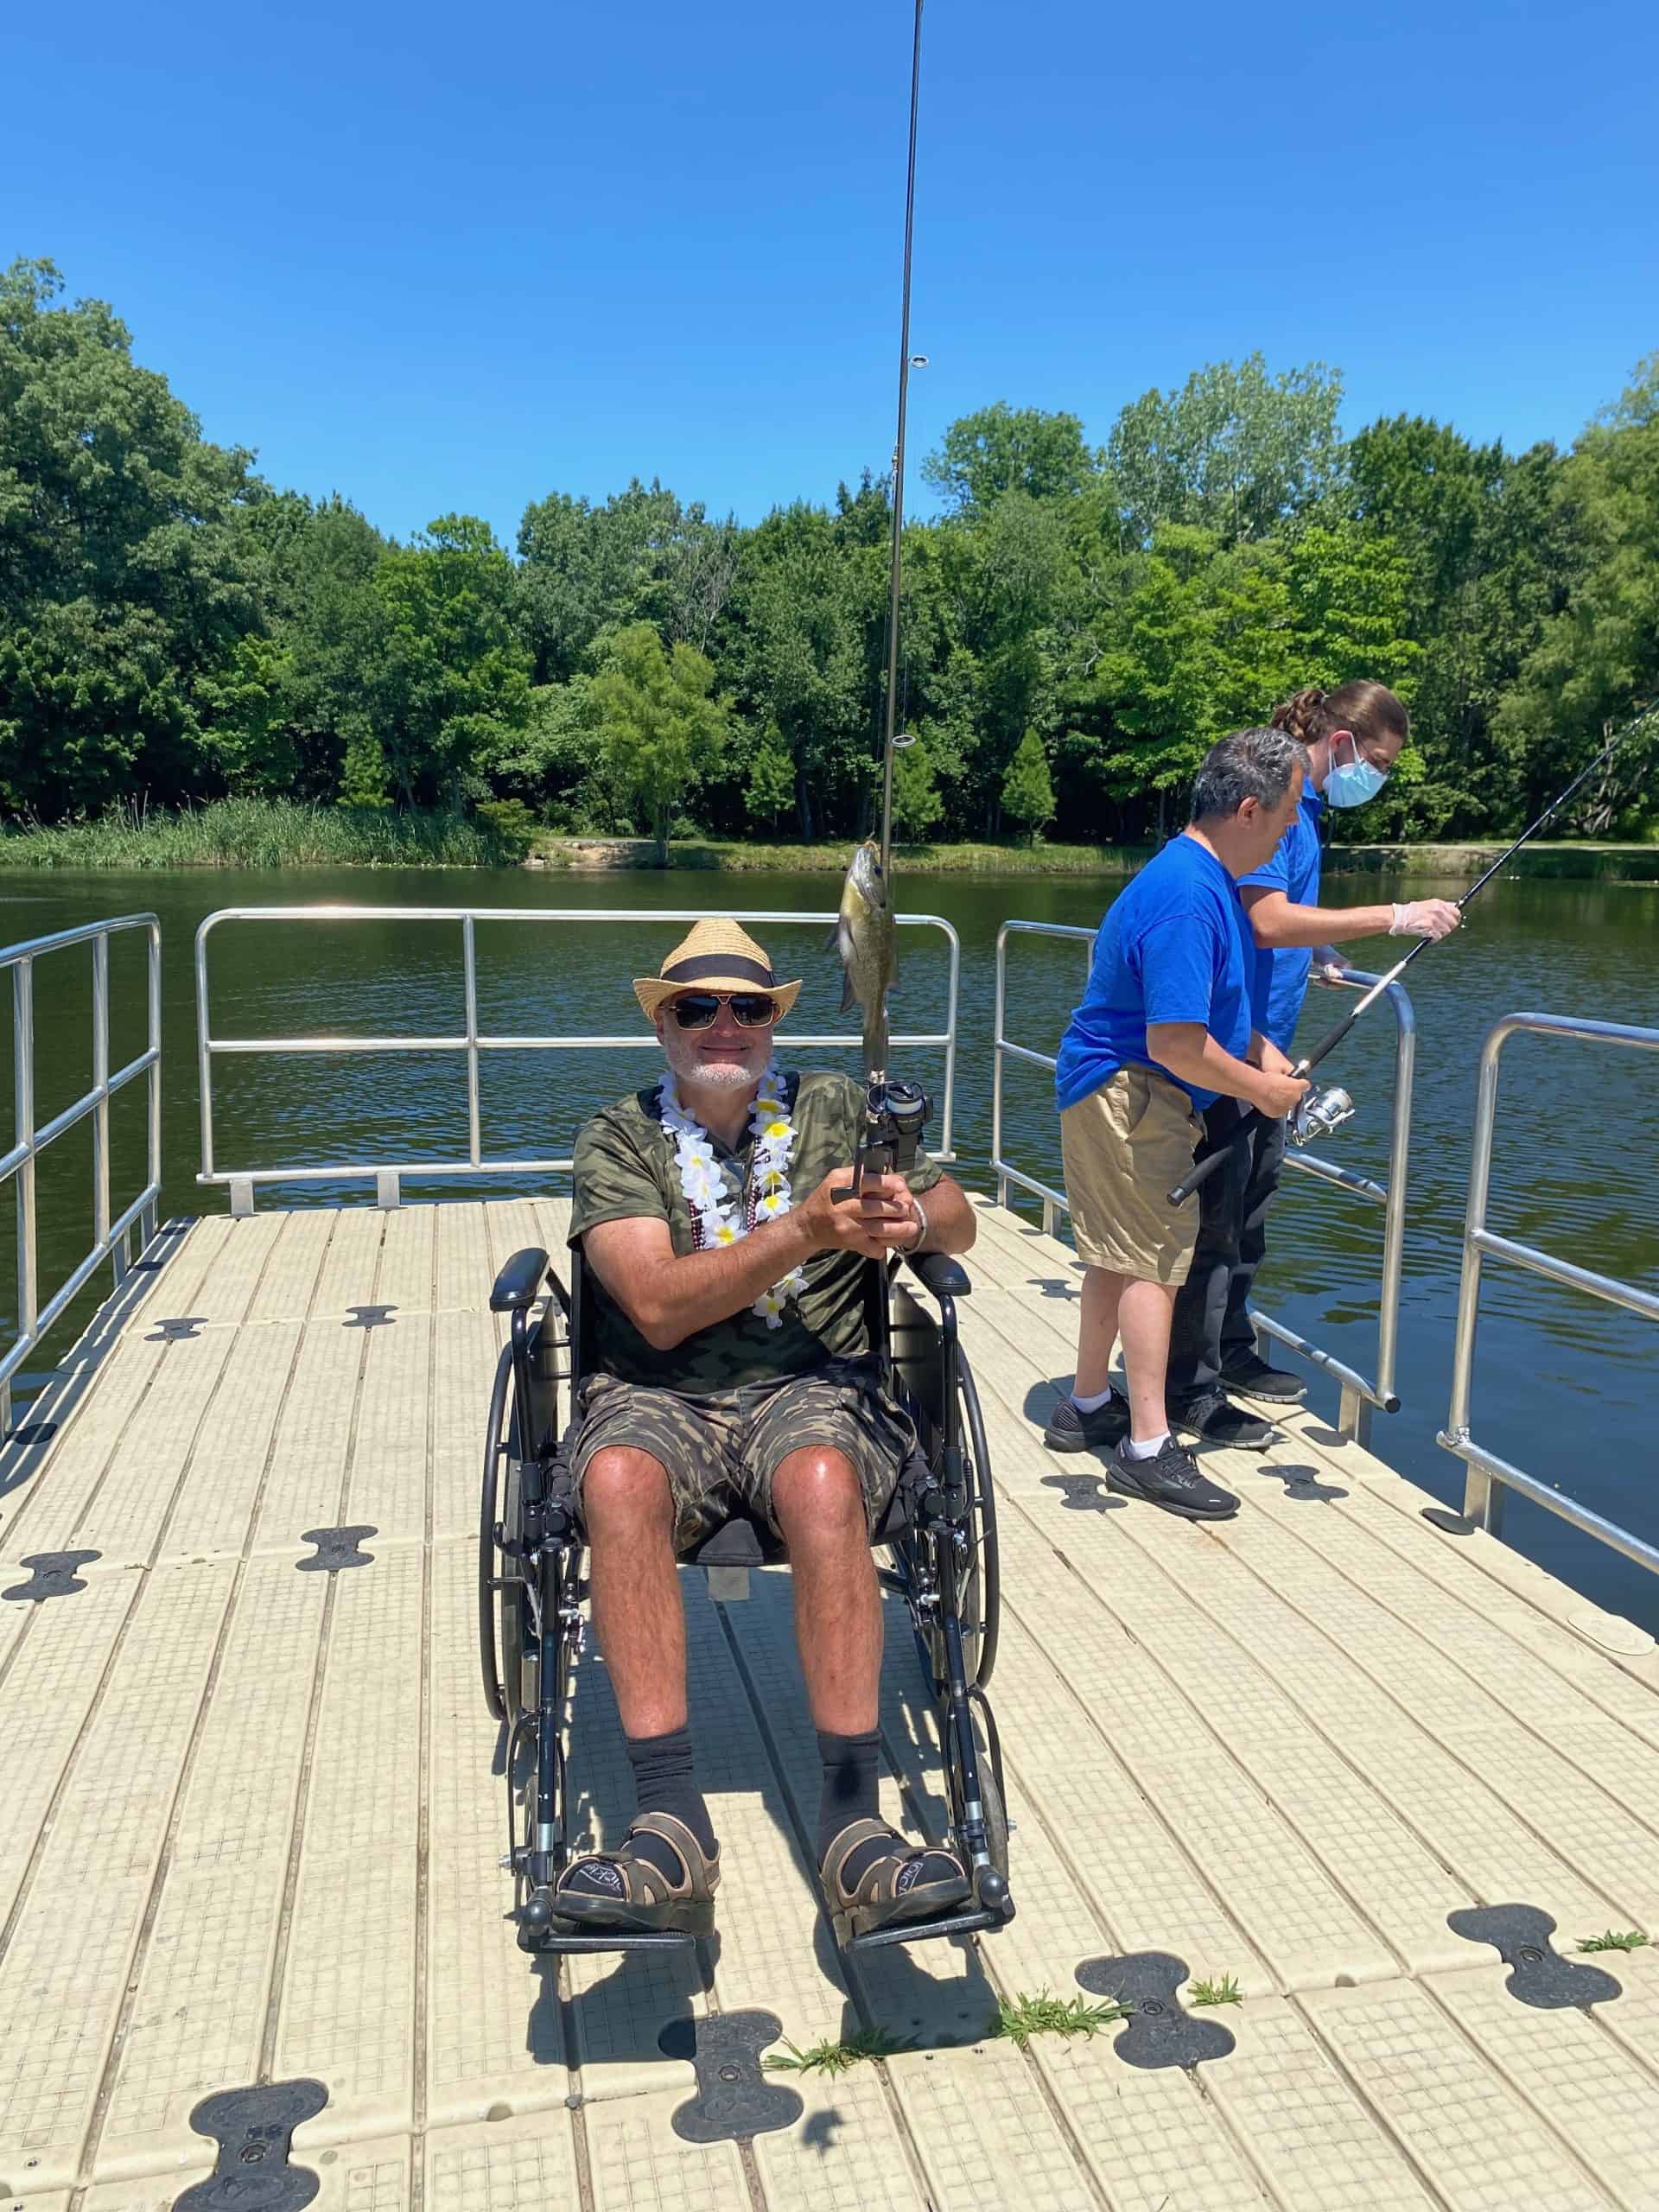 Man wearing dark sunglasses and a straw hat sitting in his wheelchair on a dock holding his fishing pole with a bluegill he caught.